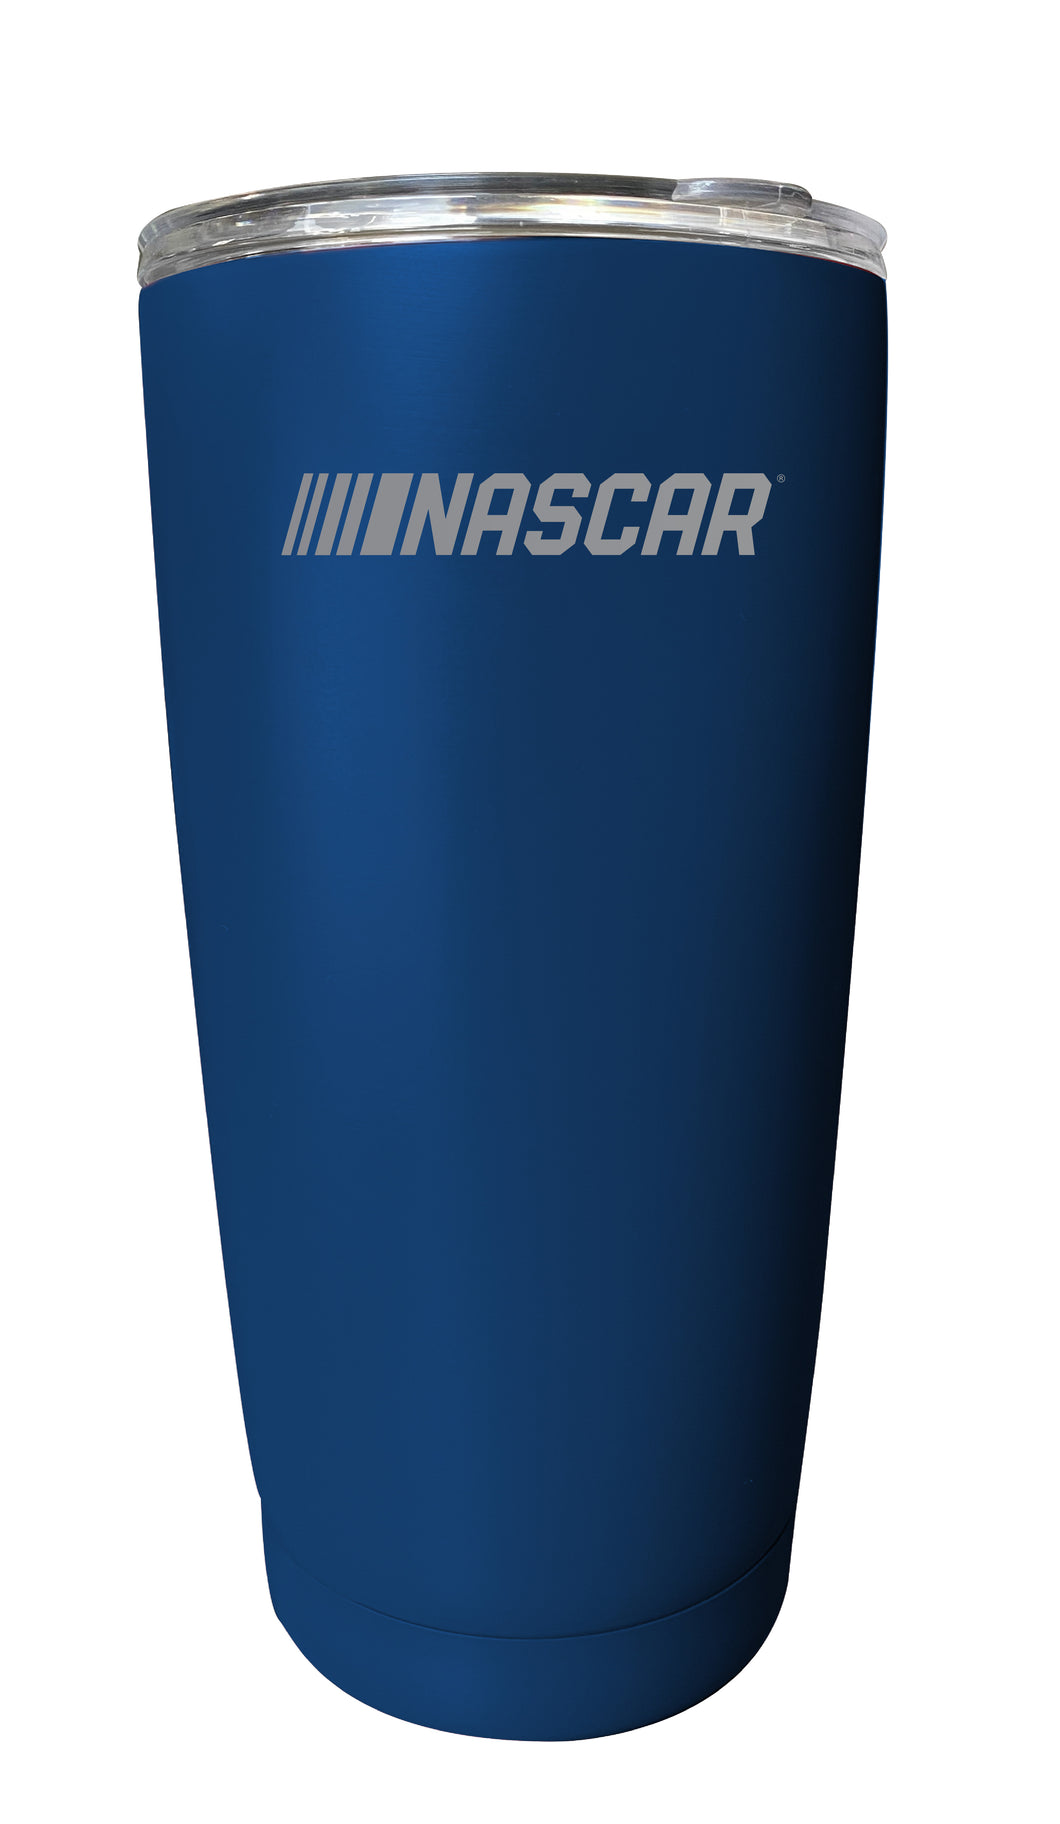 NASCAR Etched 16 oz Stainless Steel Tumbler